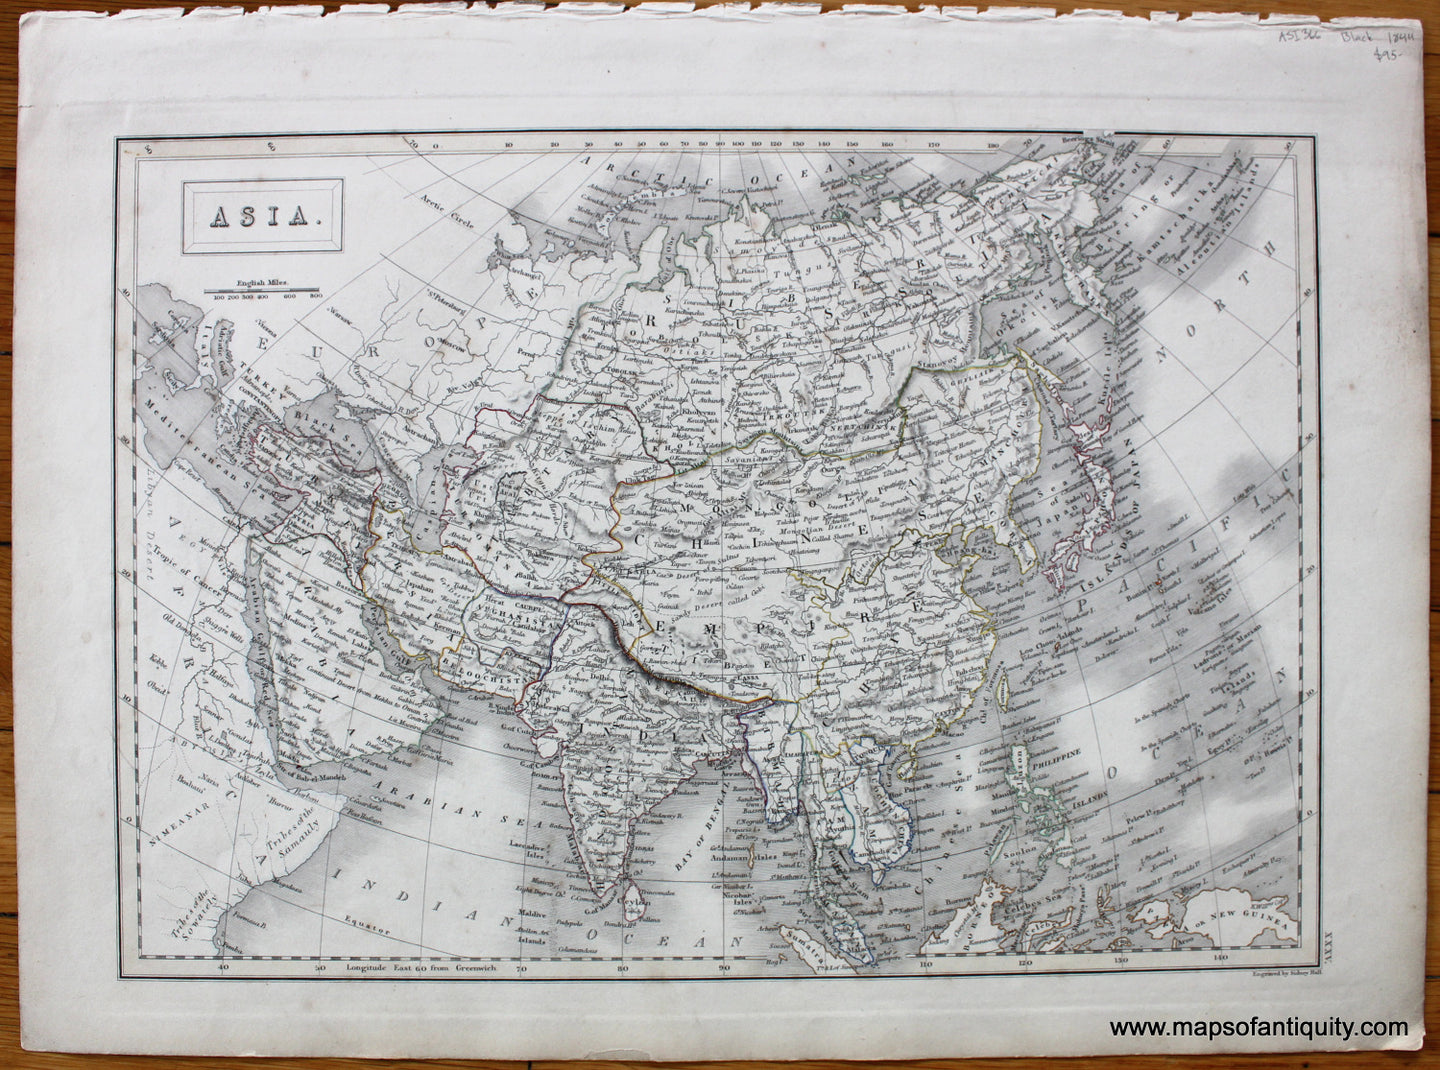 Antique-Hand-Colored-Map-Asia.-Asia-Asia-General-1844-Black-Maps-Of-Antiquity